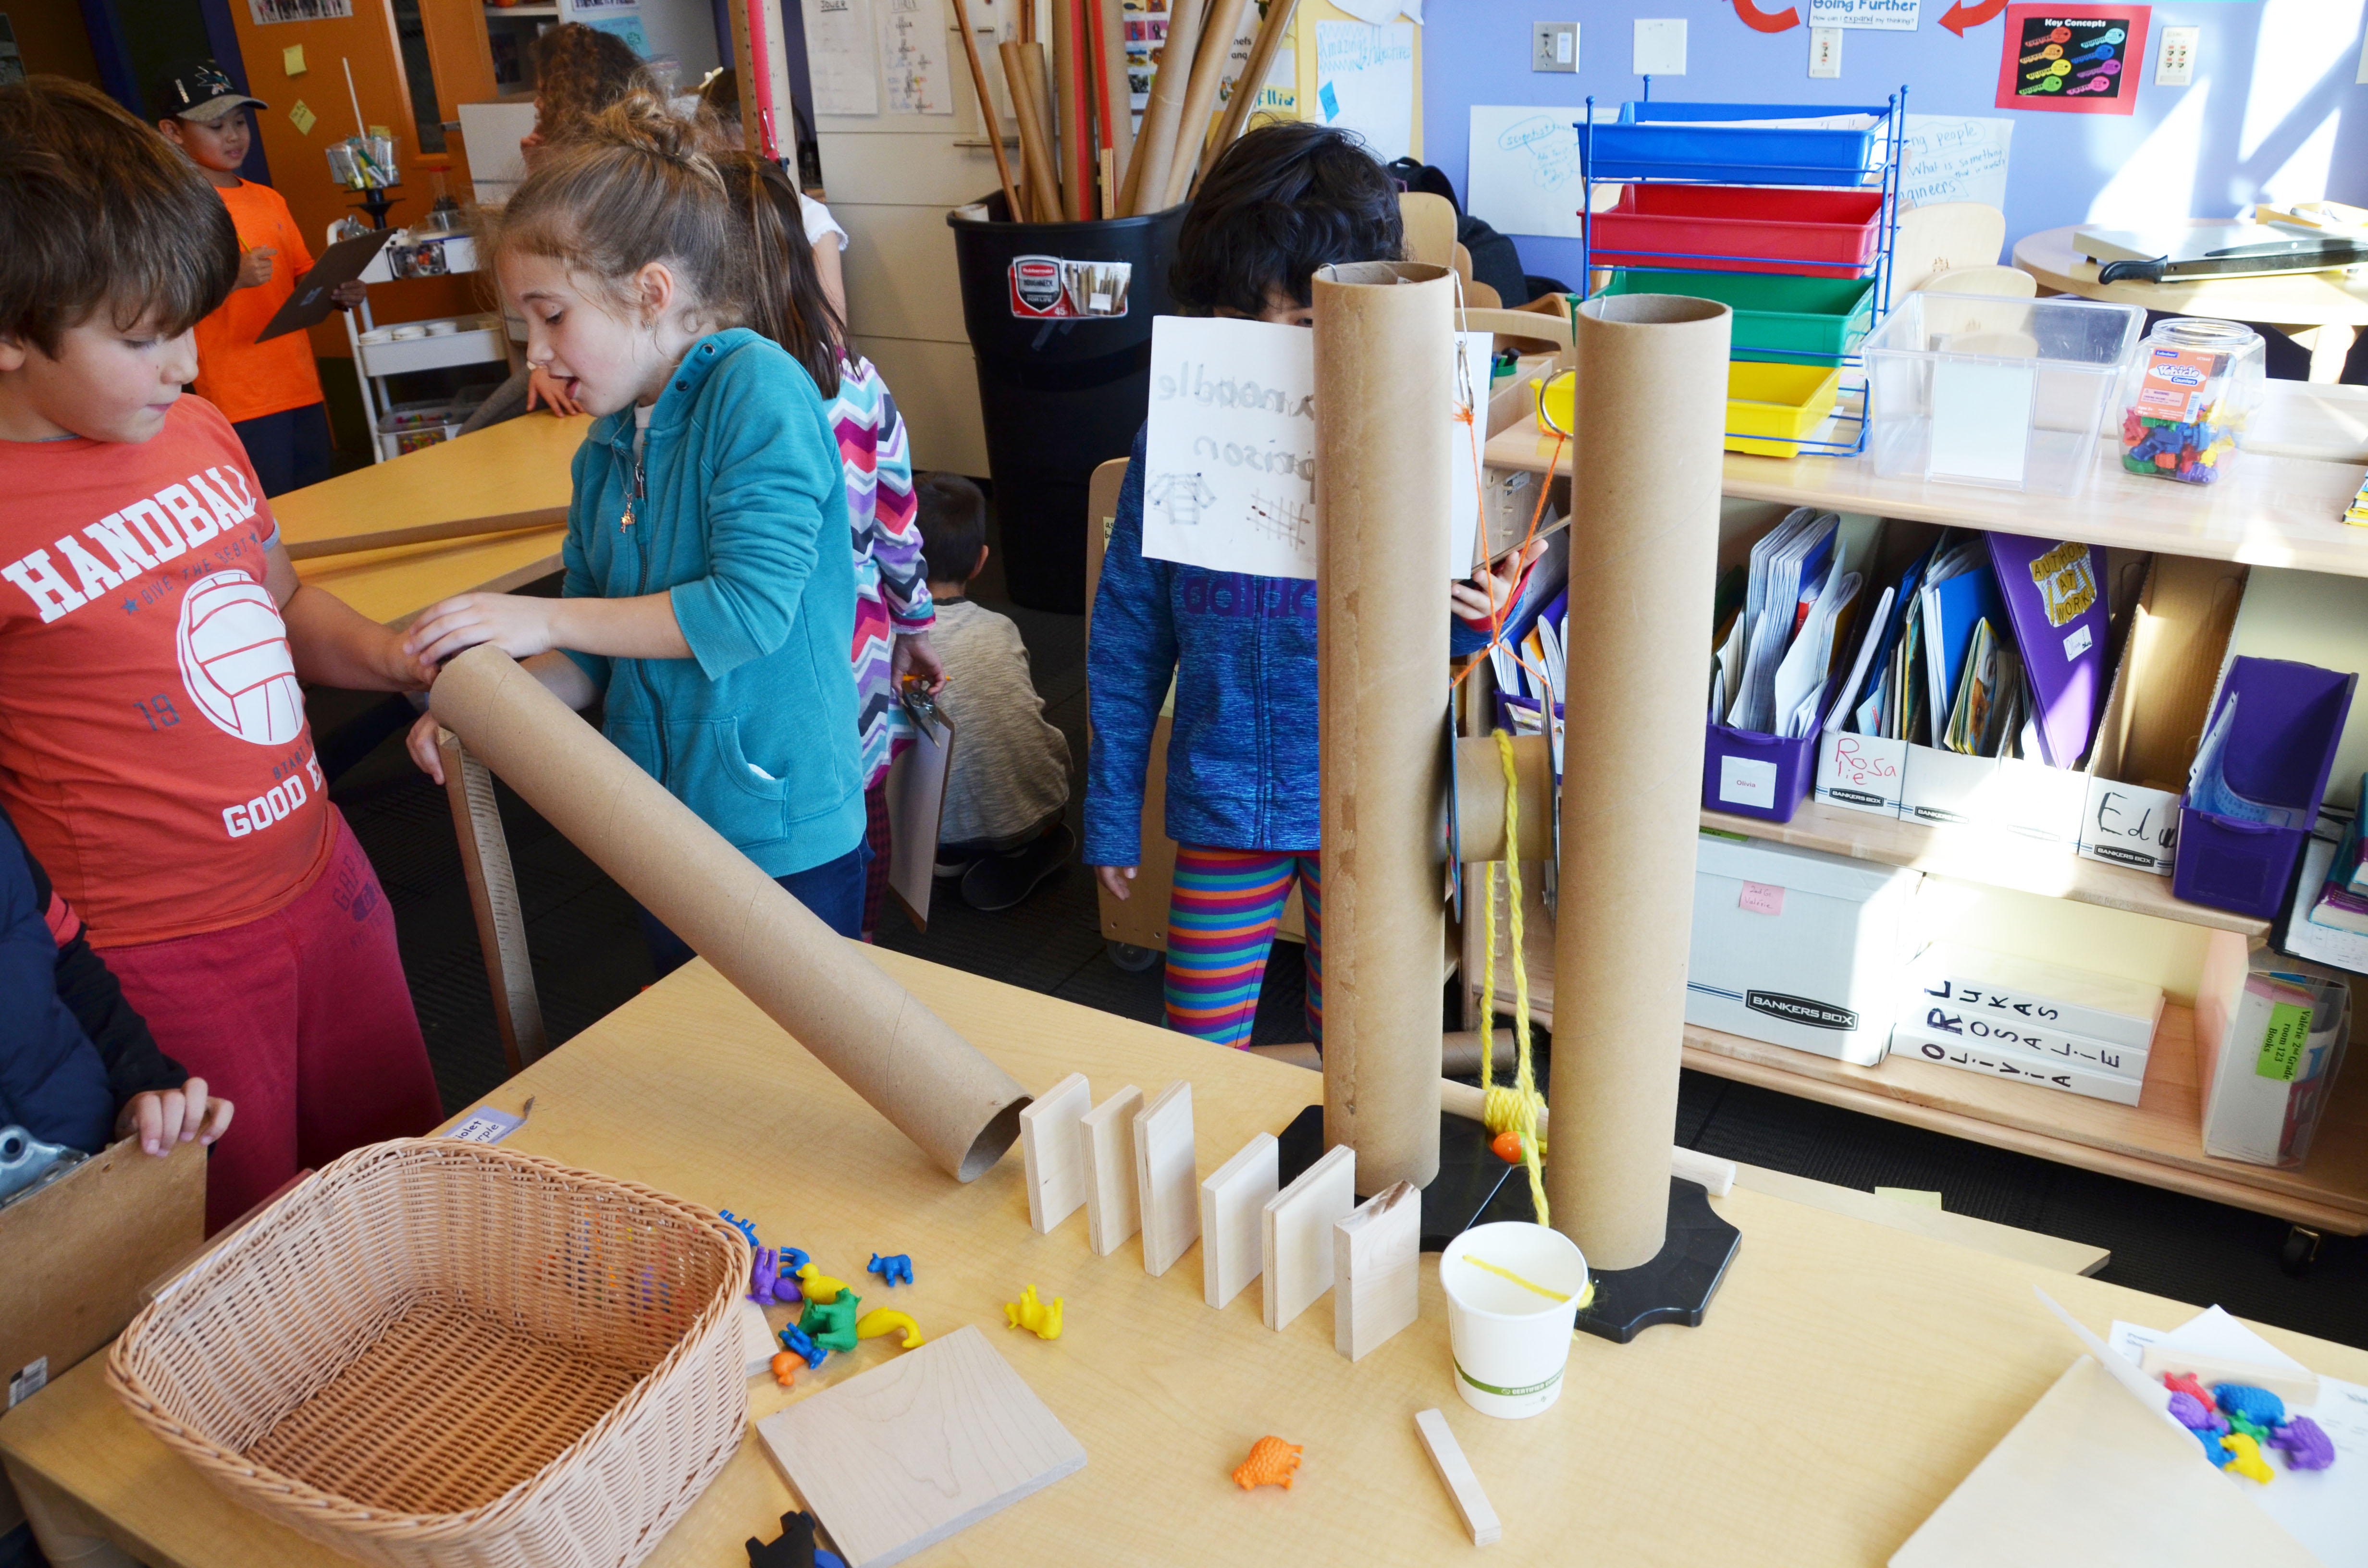 Design Beyond the MakerSpace